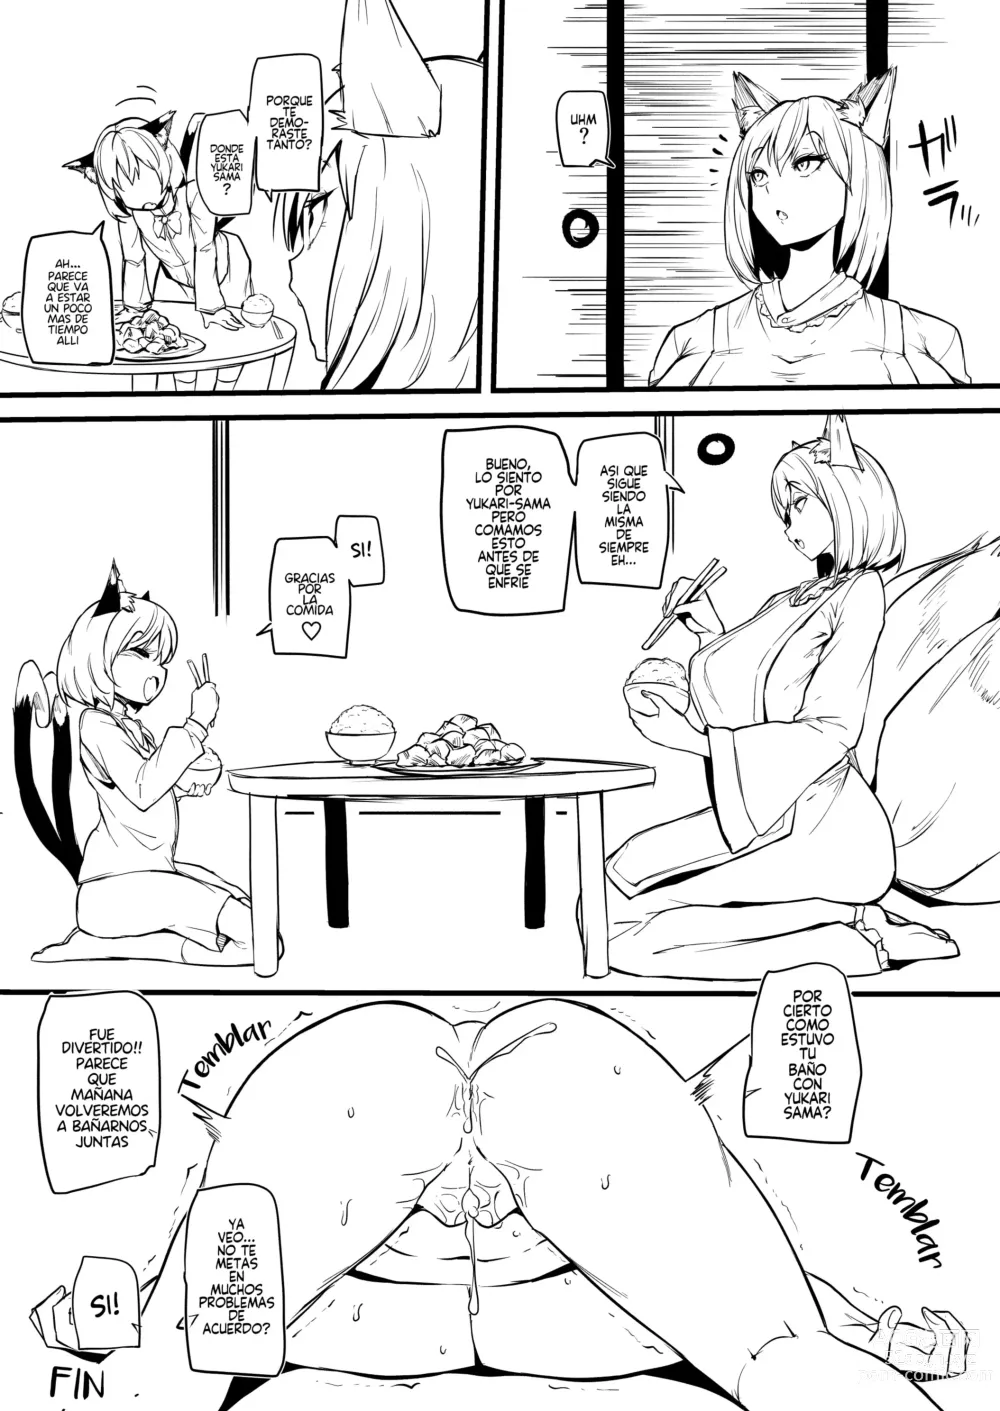 Page 13 of doujinshi Oh Chen Chen